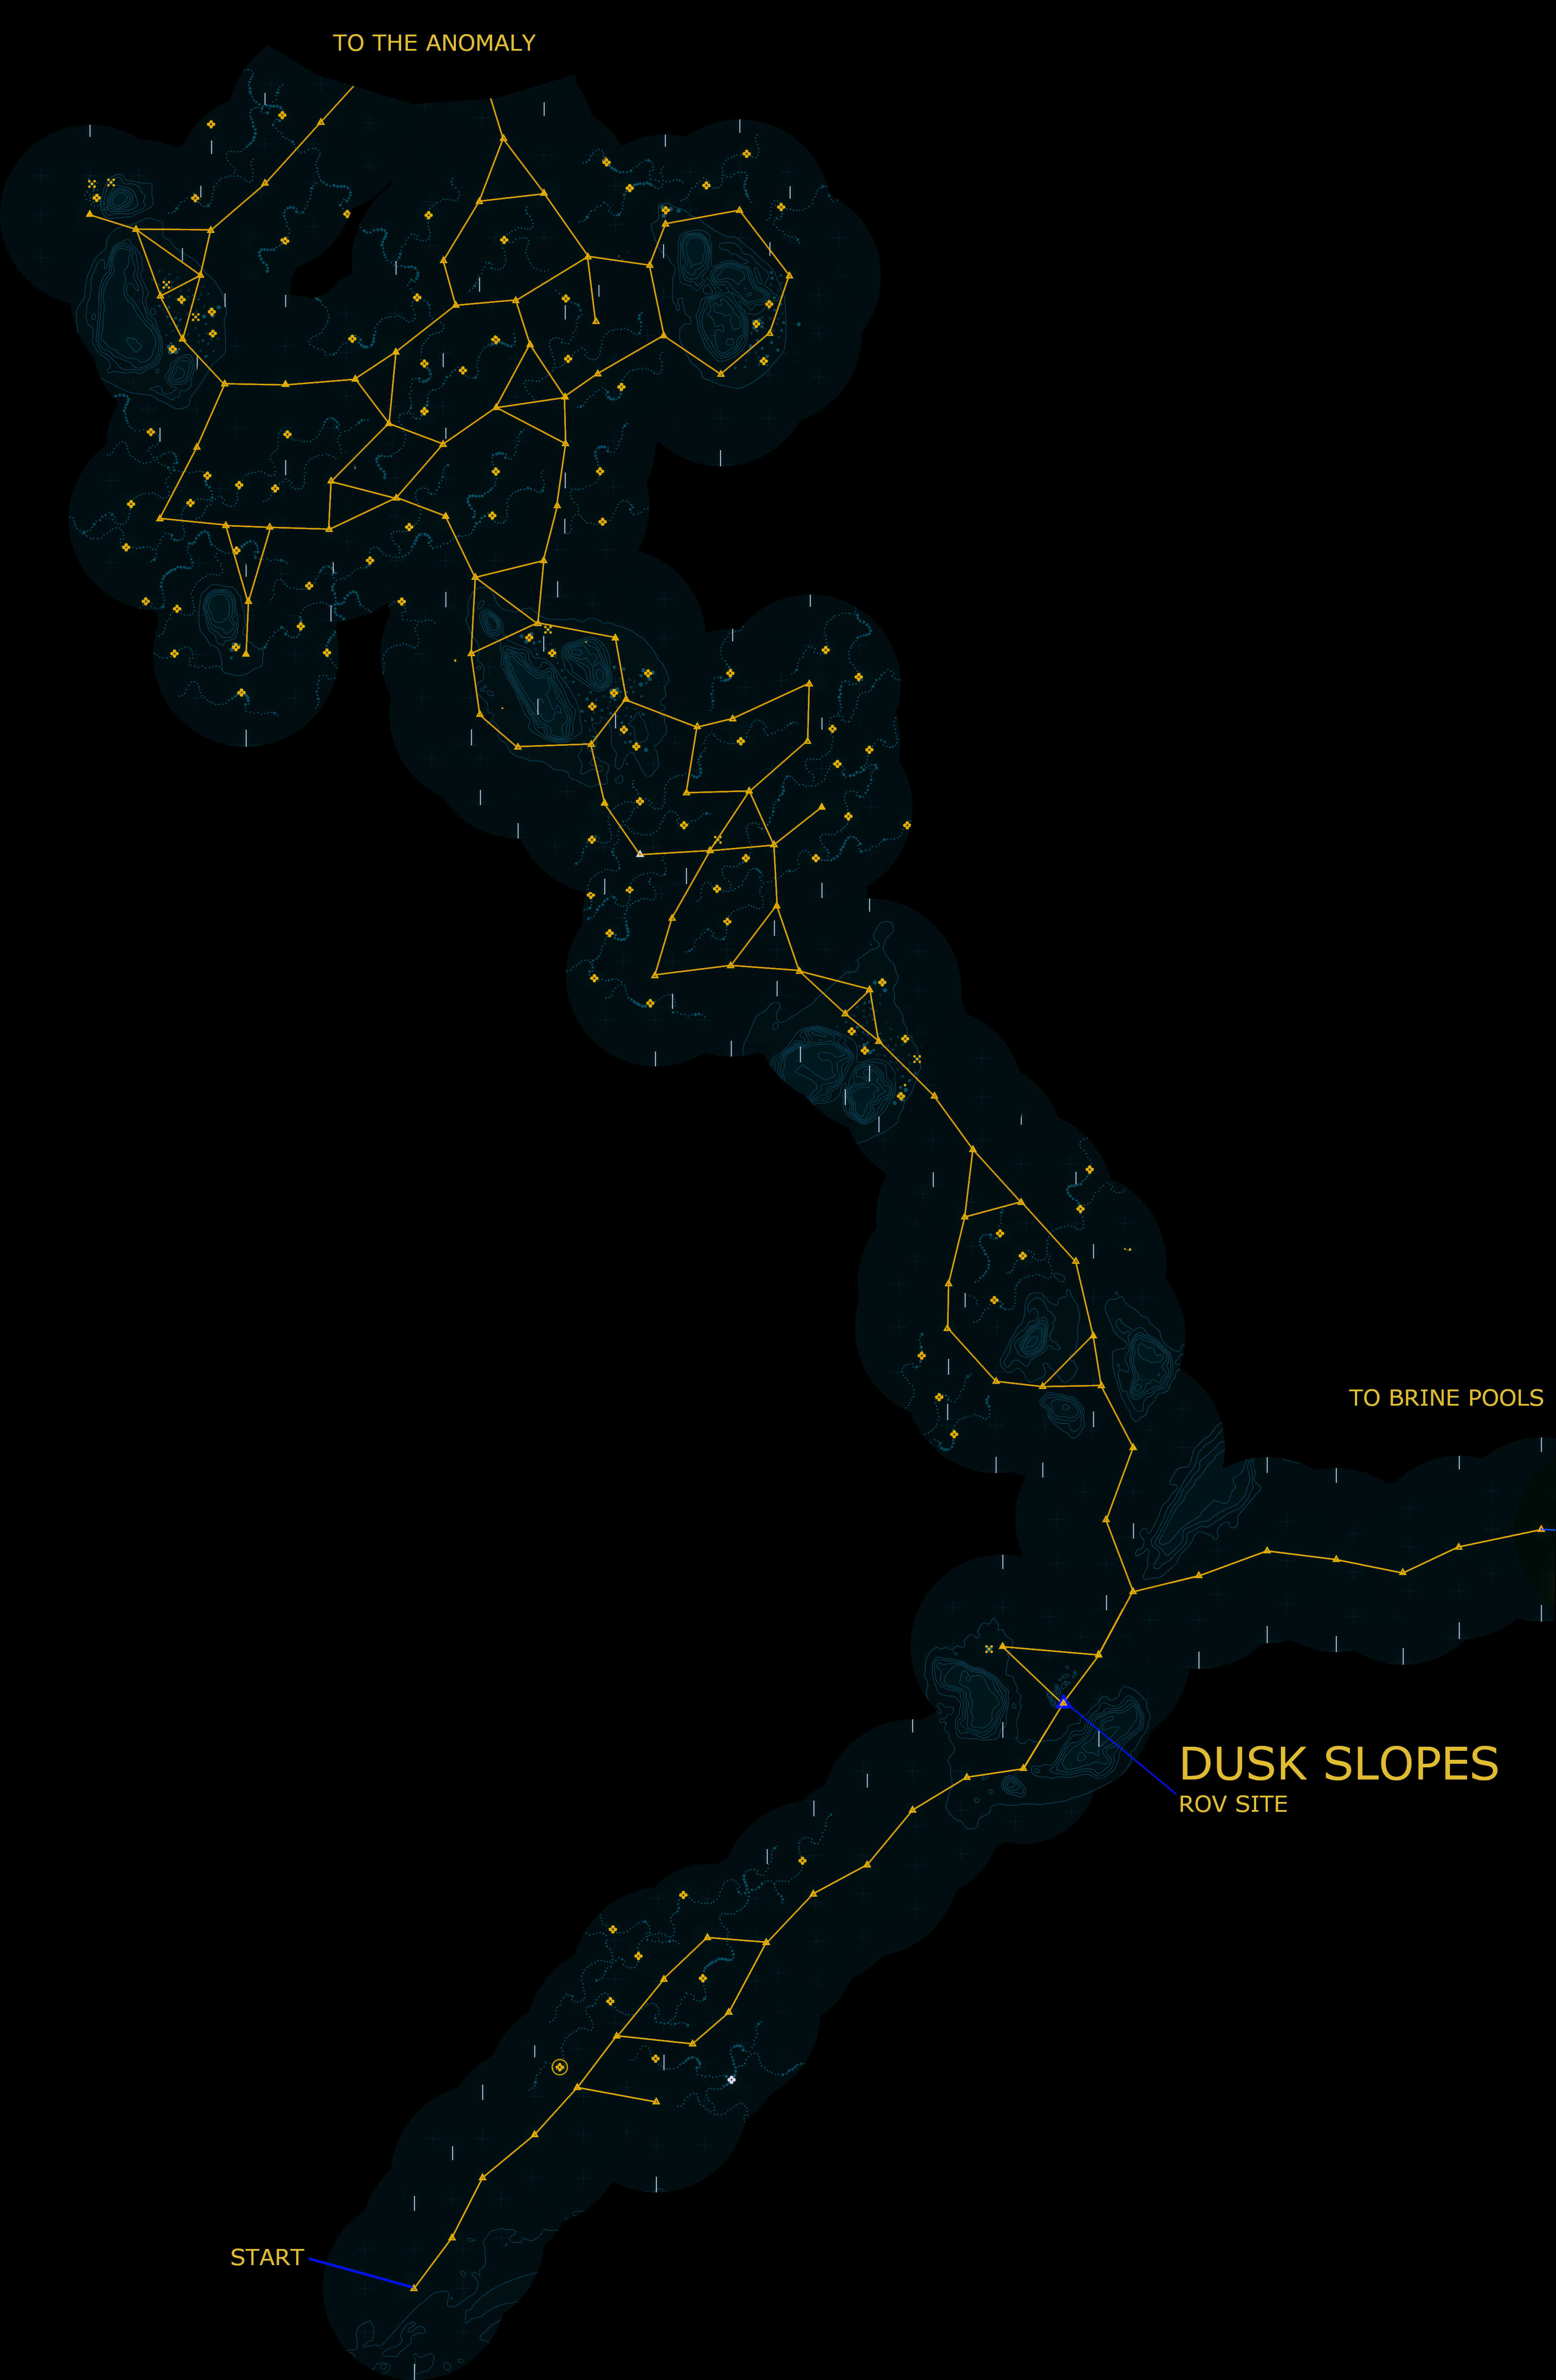 In Other Waters Provides the detailed complete maps - 4. Dusk Slopes - DF19566